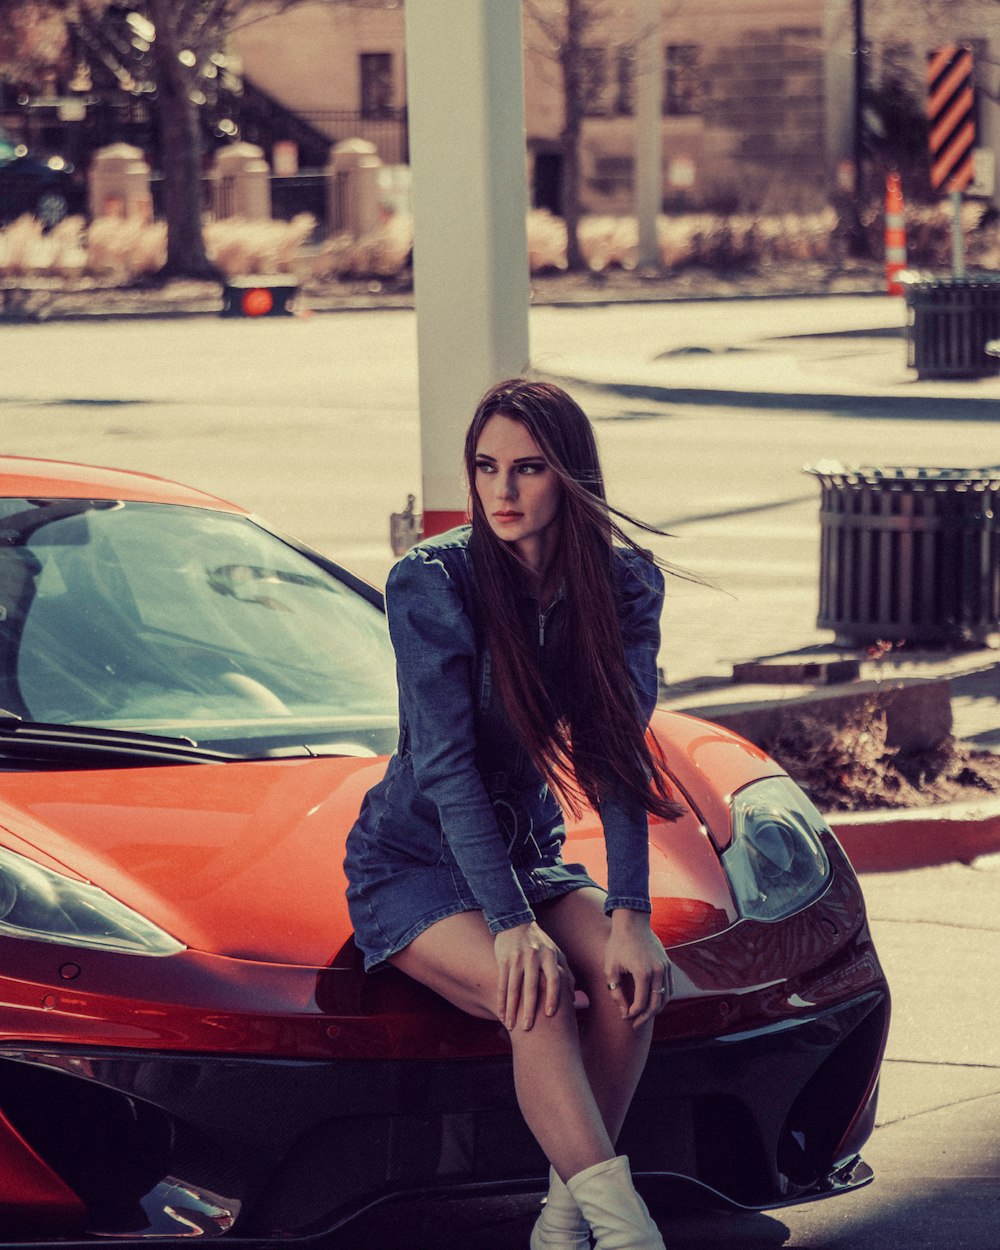 woman in black leather jacket sitting on red car